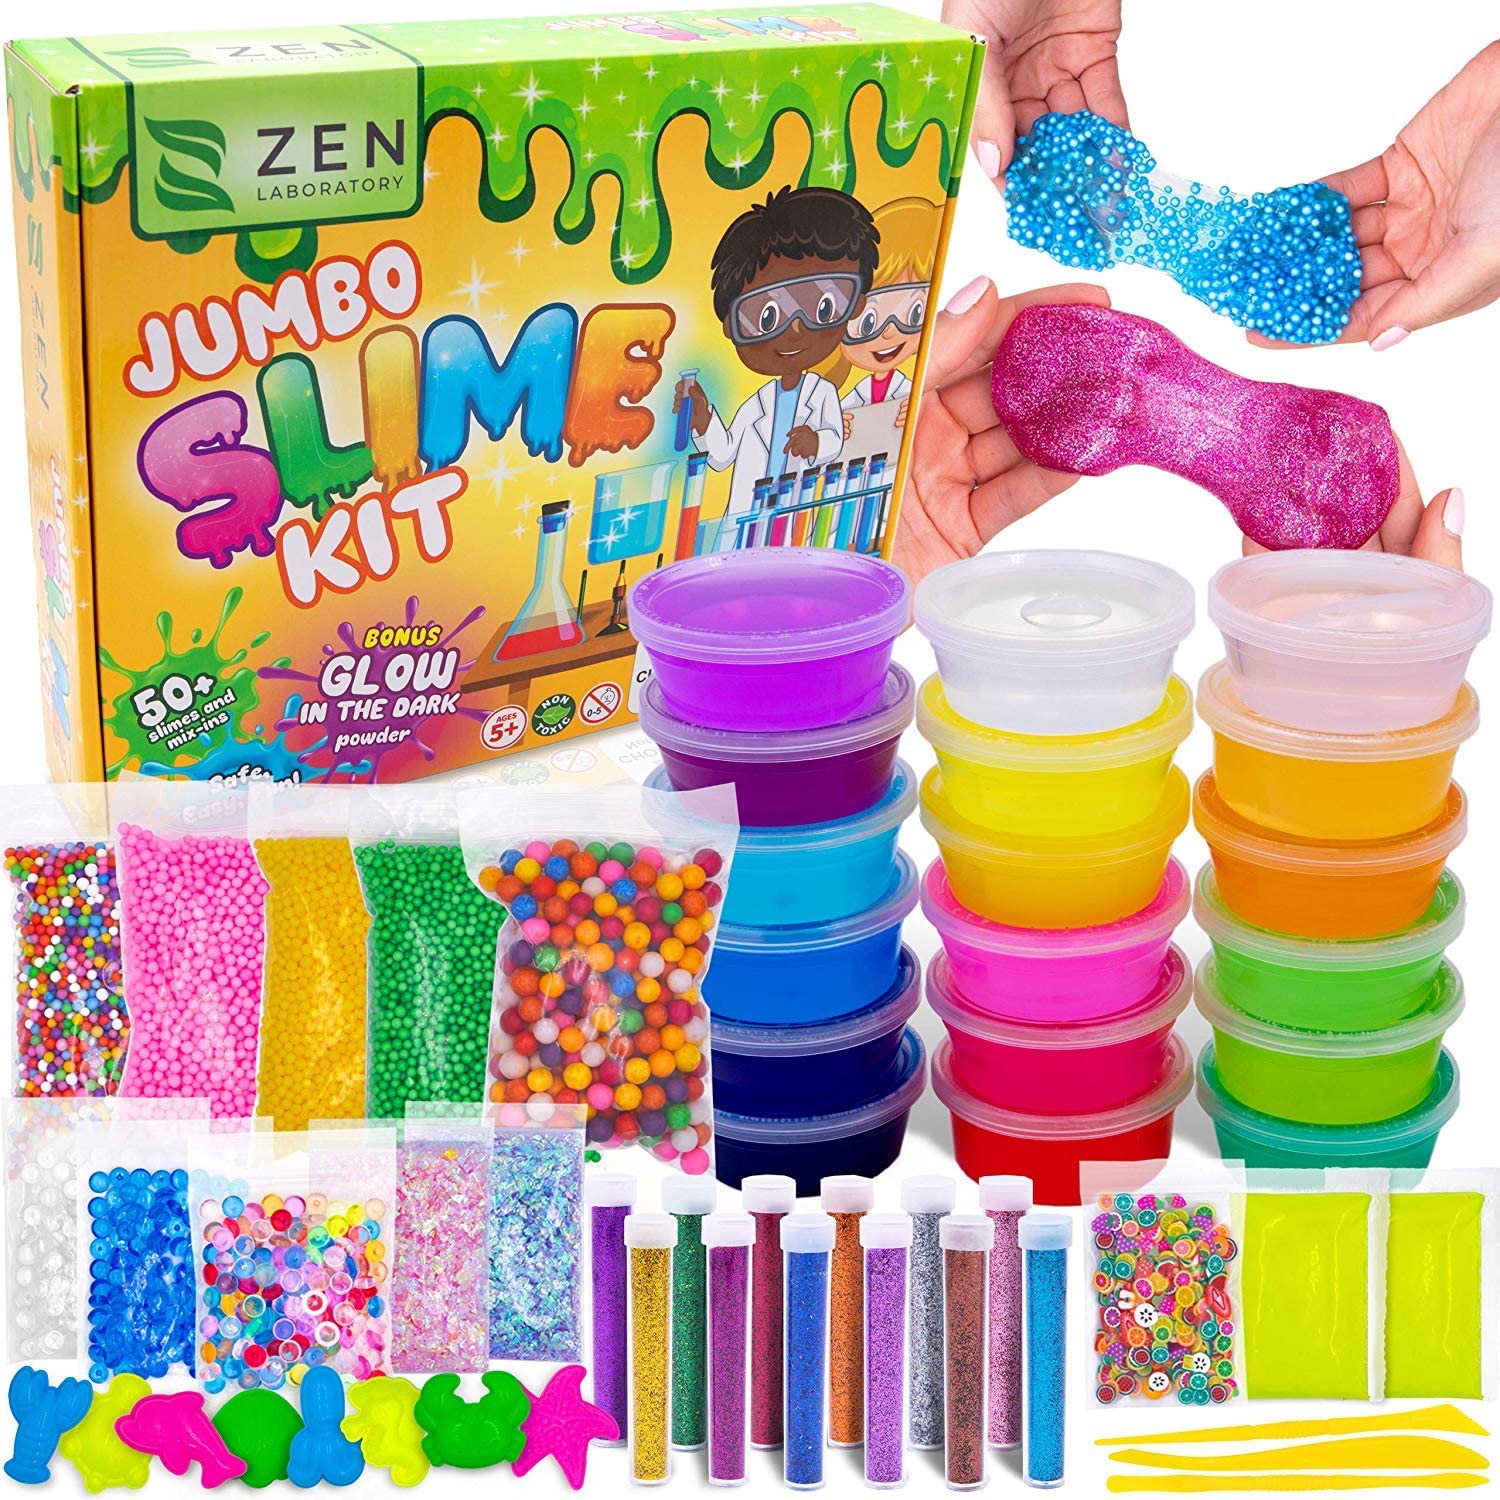 Real Review of my Unicorn Slime Kit from Original Stationery 